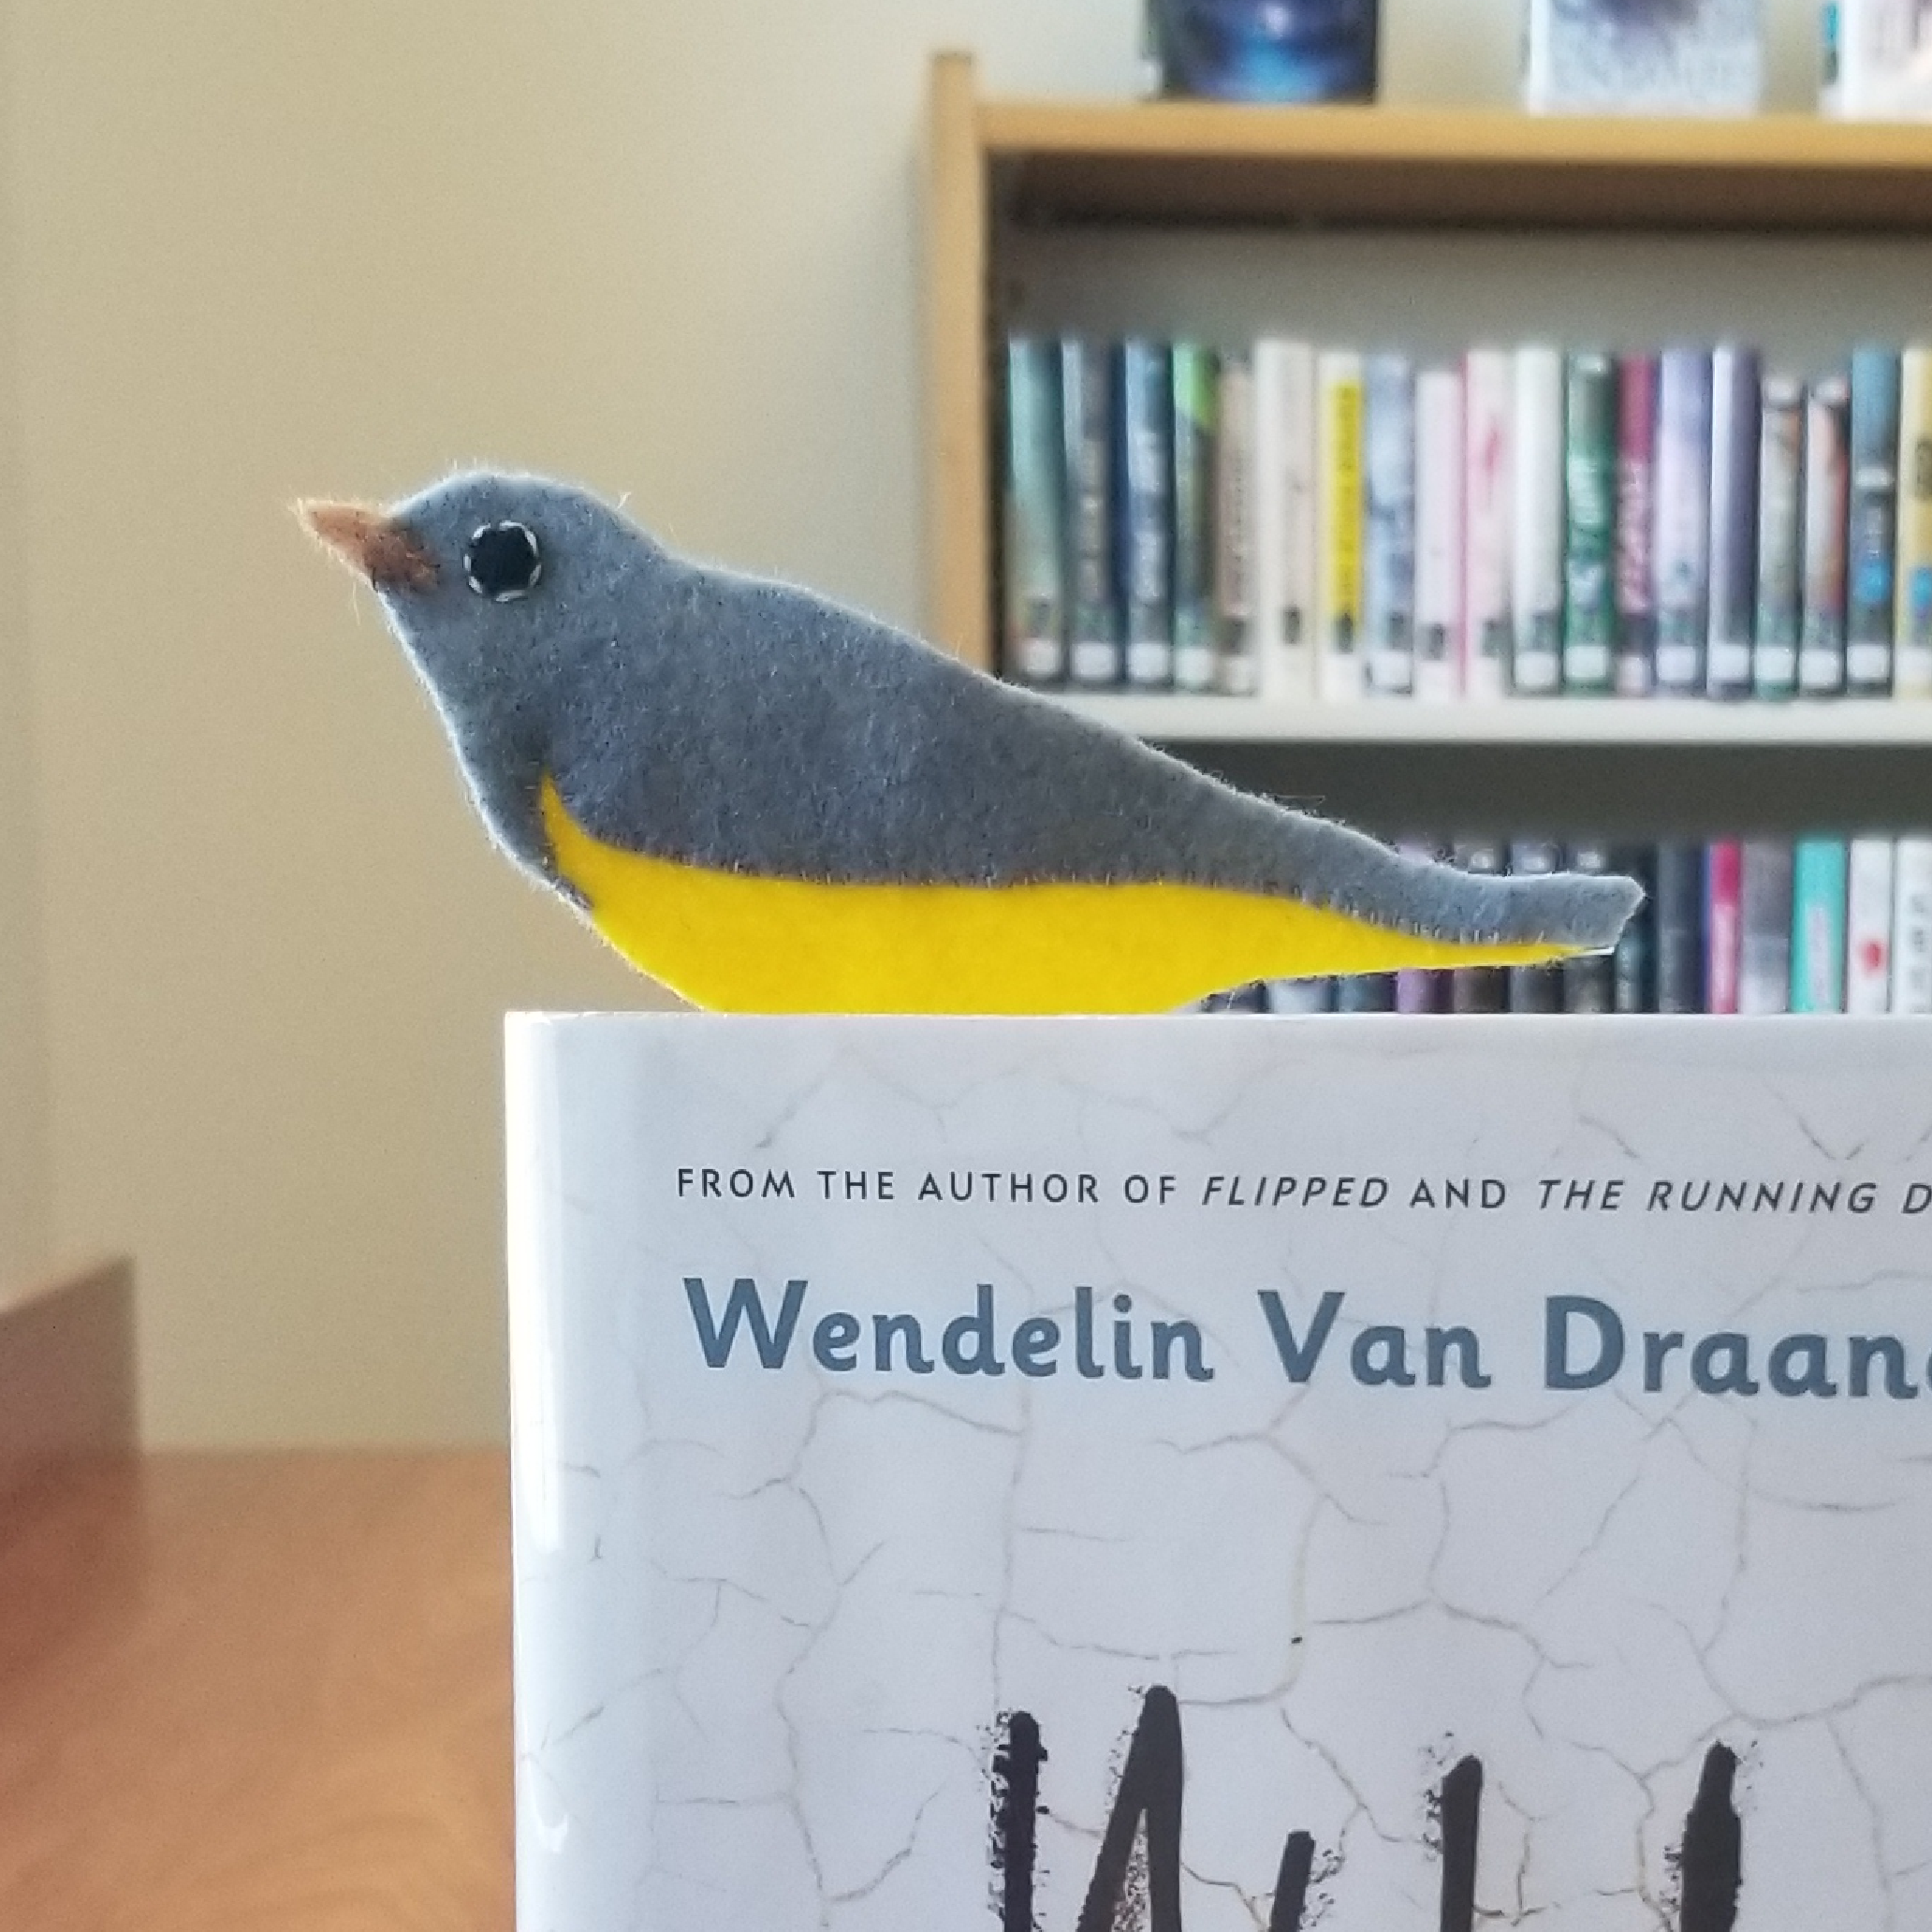 A gray and yellow felt bird bookmark sticking out of the top of the book. The bird is visible in profile and is a Connecticut Warbler.